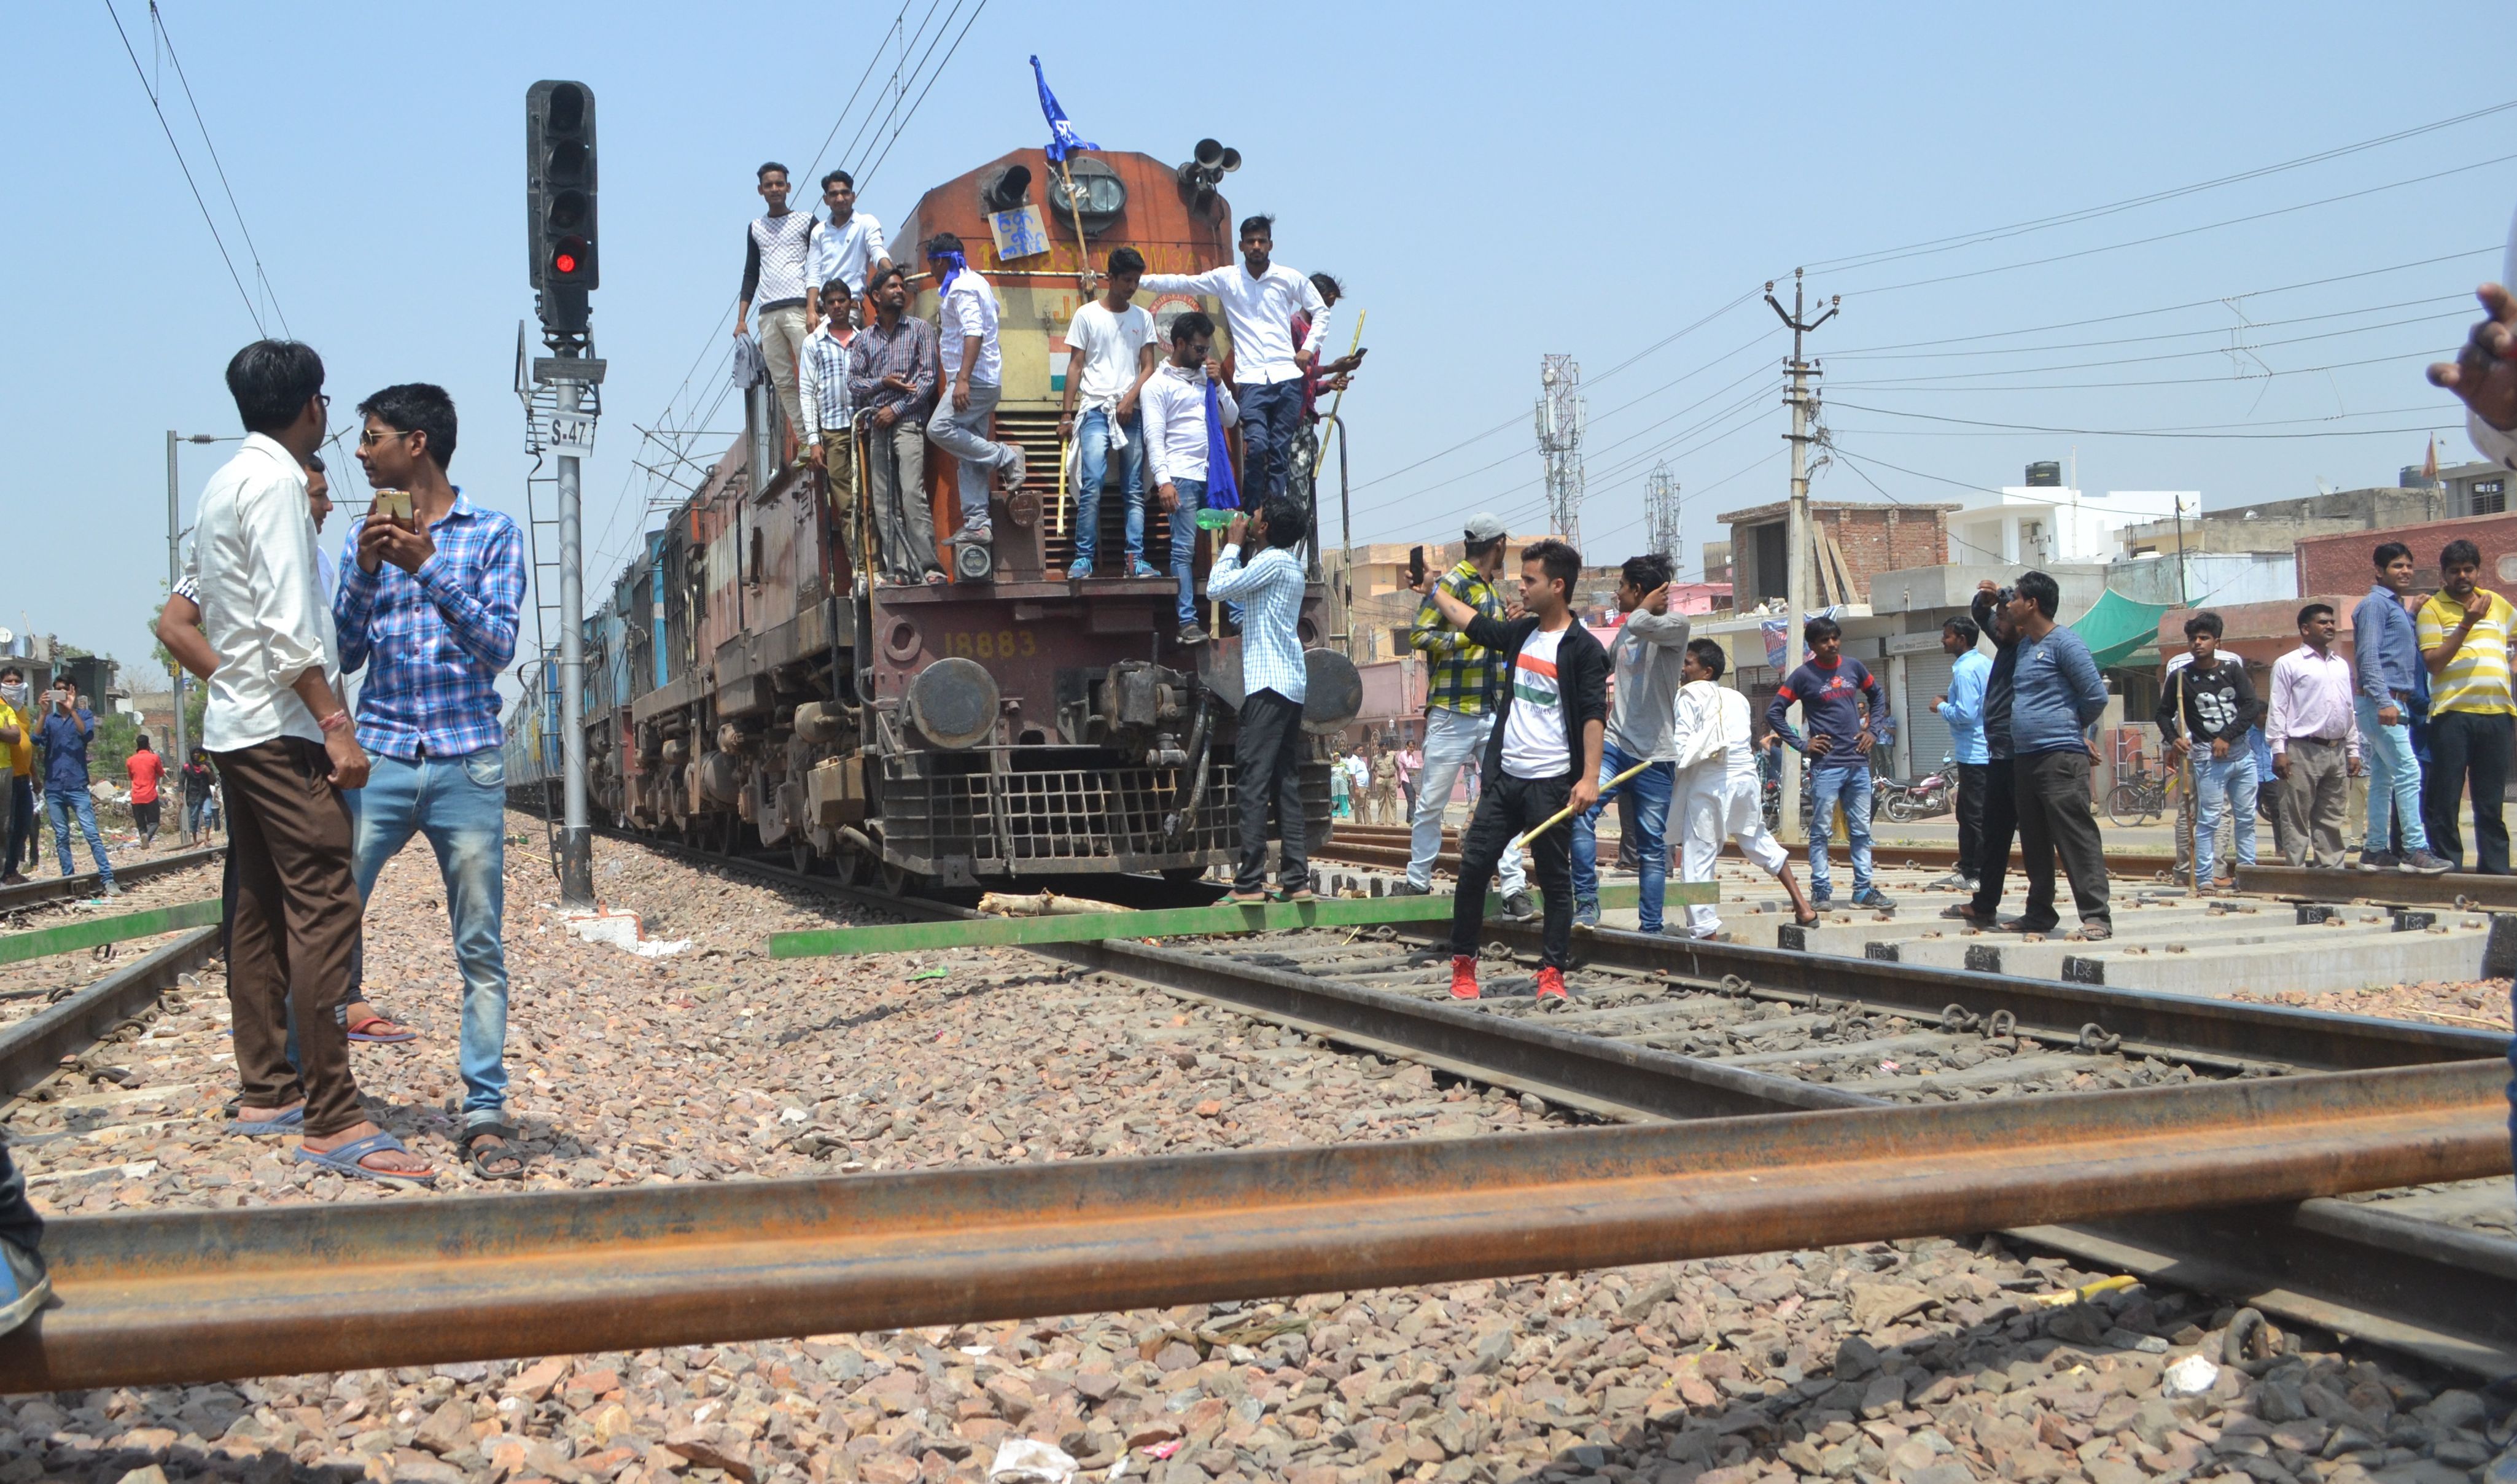 TRAIN STOPPAGE IN ALWAR DISTRICT